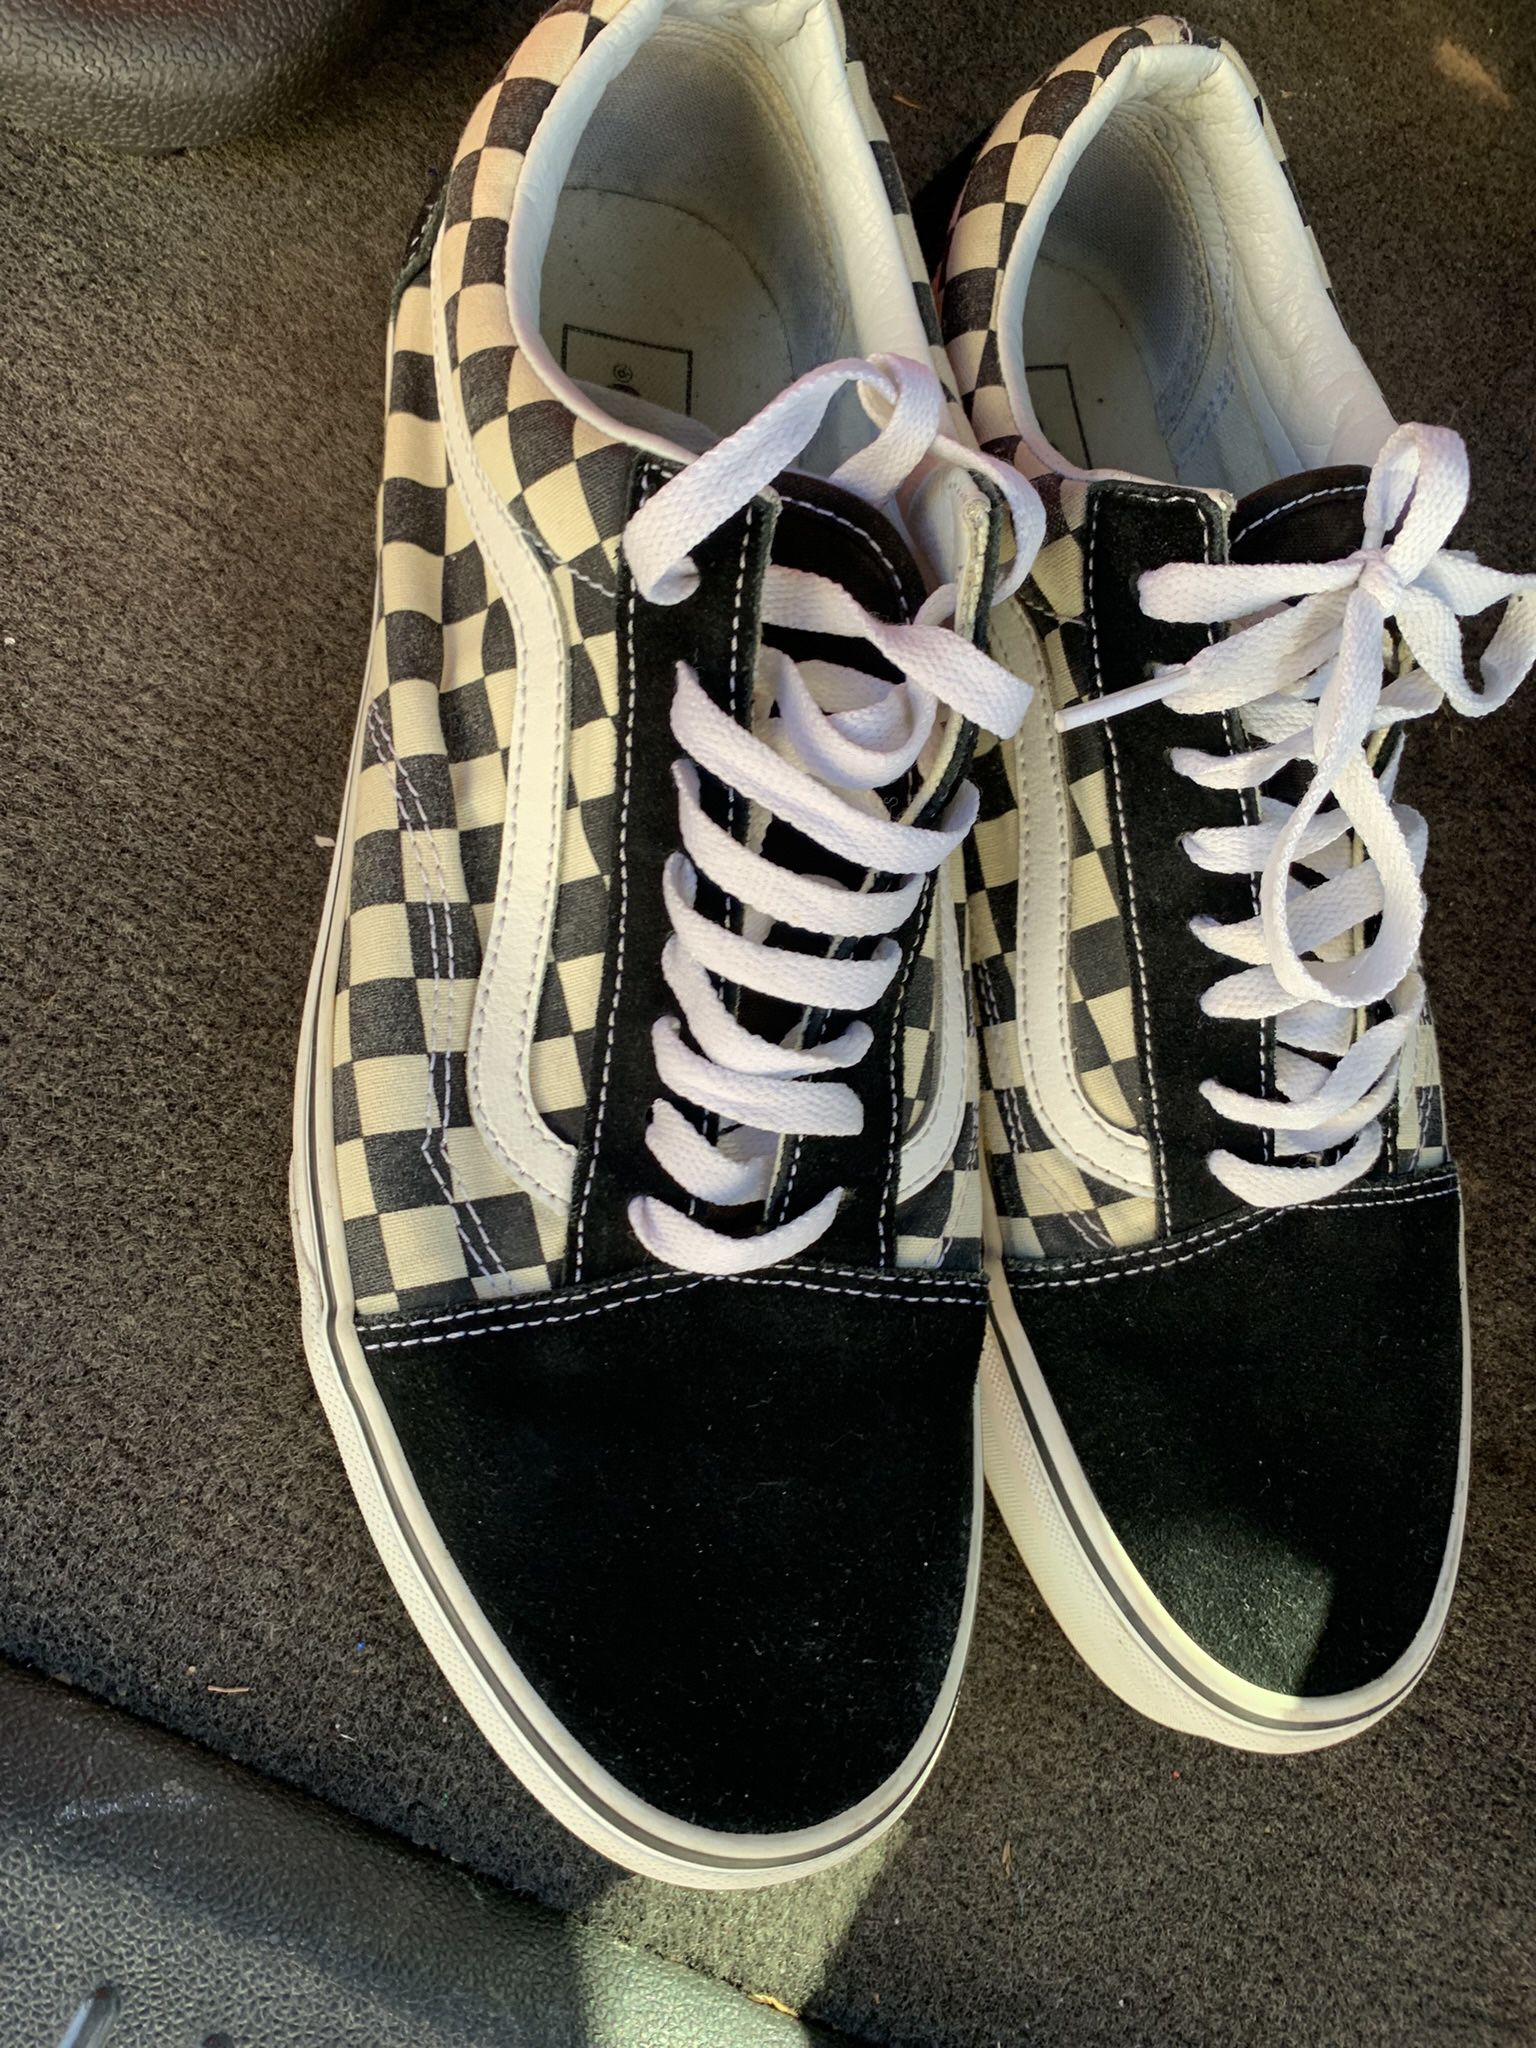 Vans Primary Check Old Skool Size 12 Sale in Yonkers, NY - OfferUp